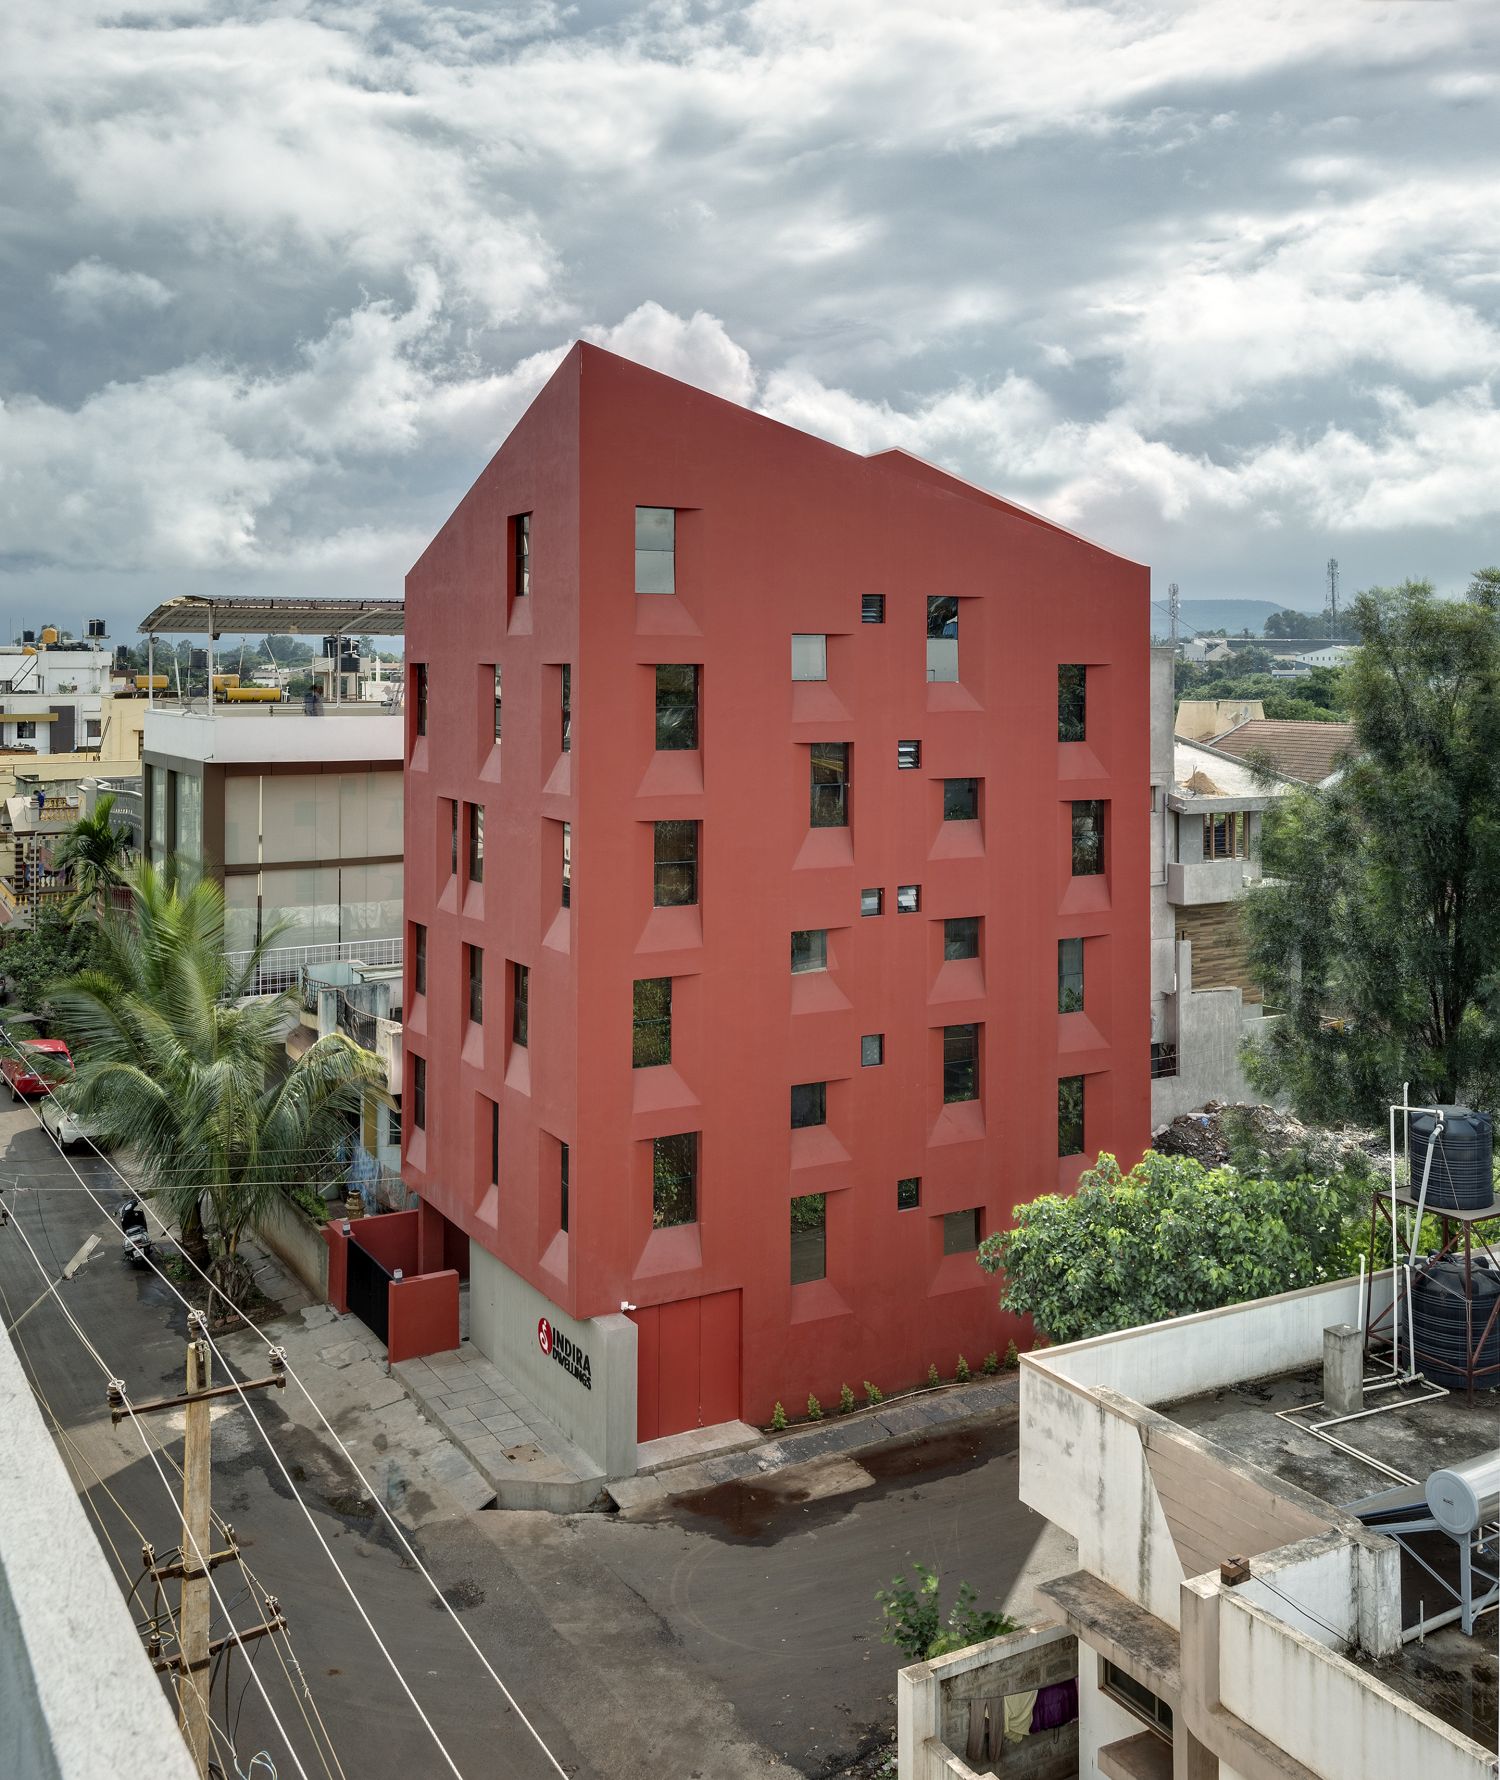 Stacked Student Housing - Thirdspace Architecture Studio